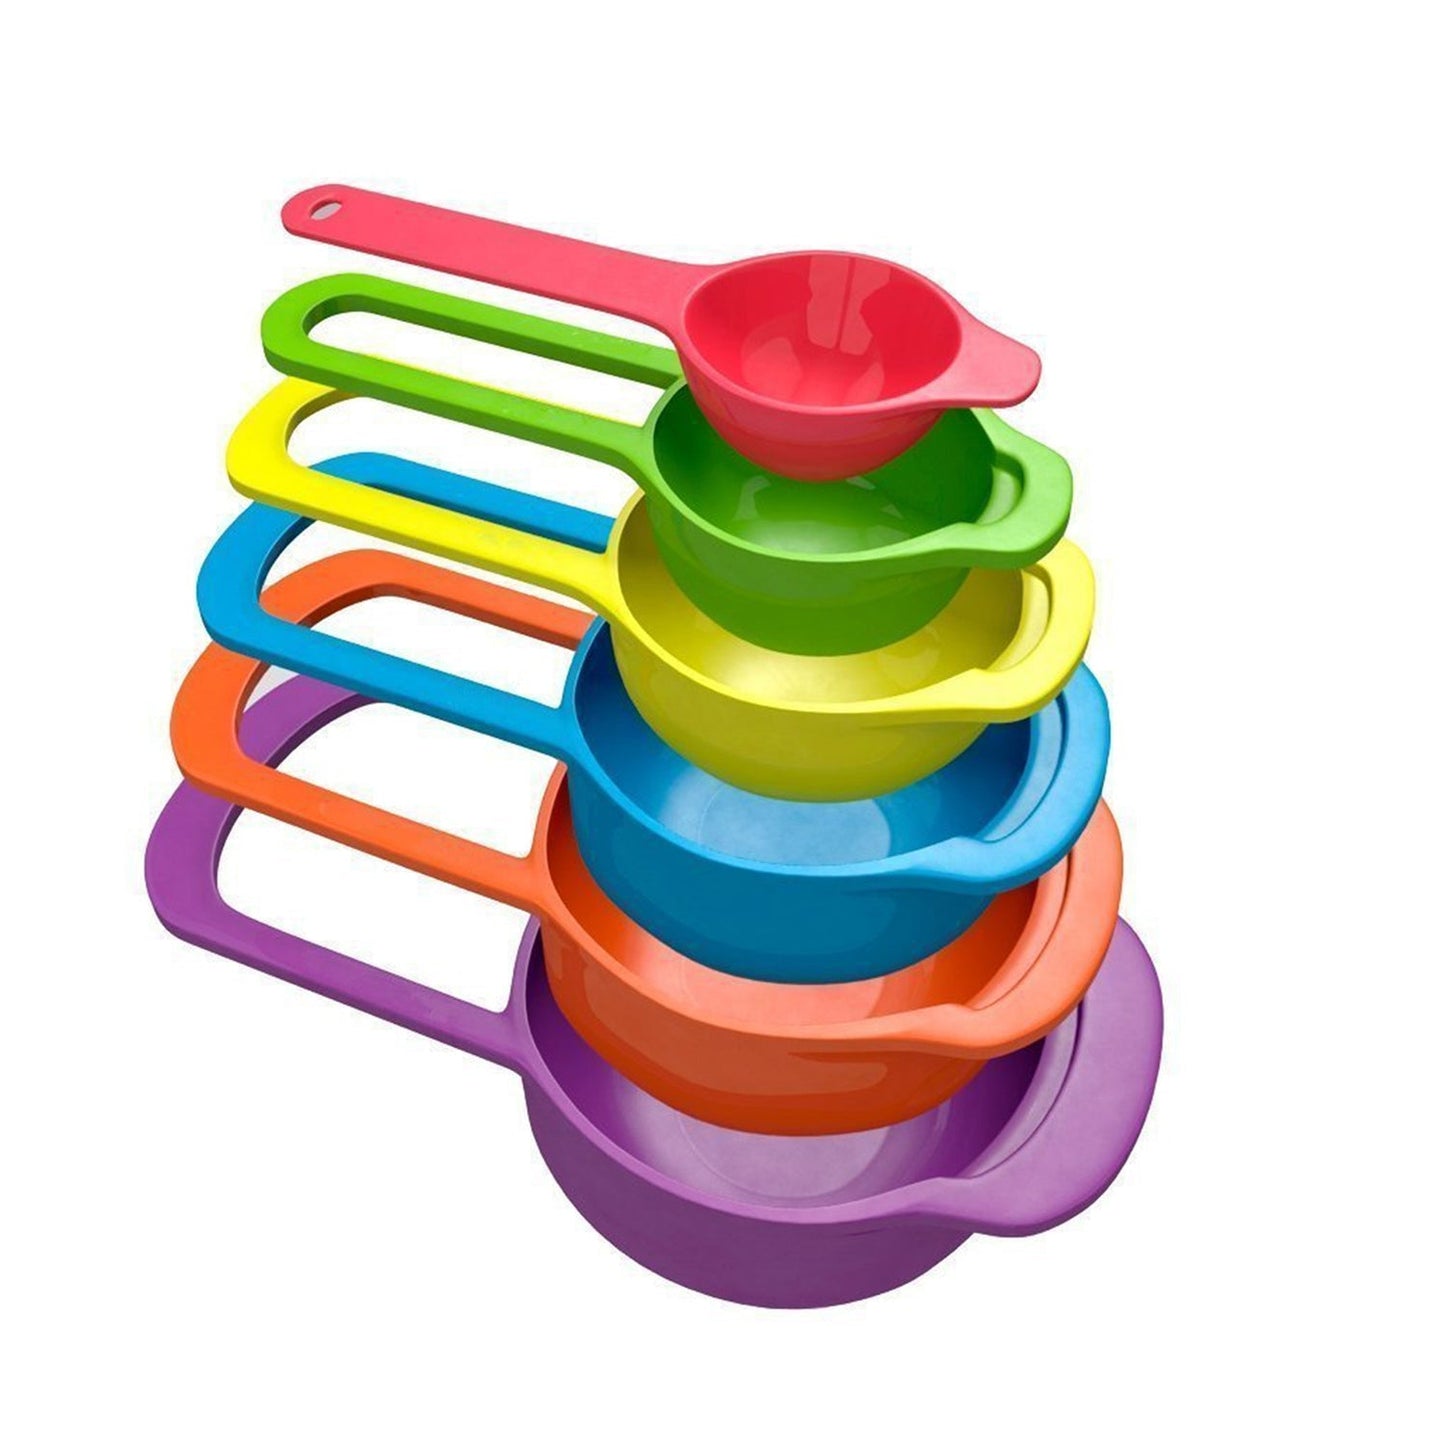 PLASTIC MEASURING SPOONS FOR KITCHEN 6IN1